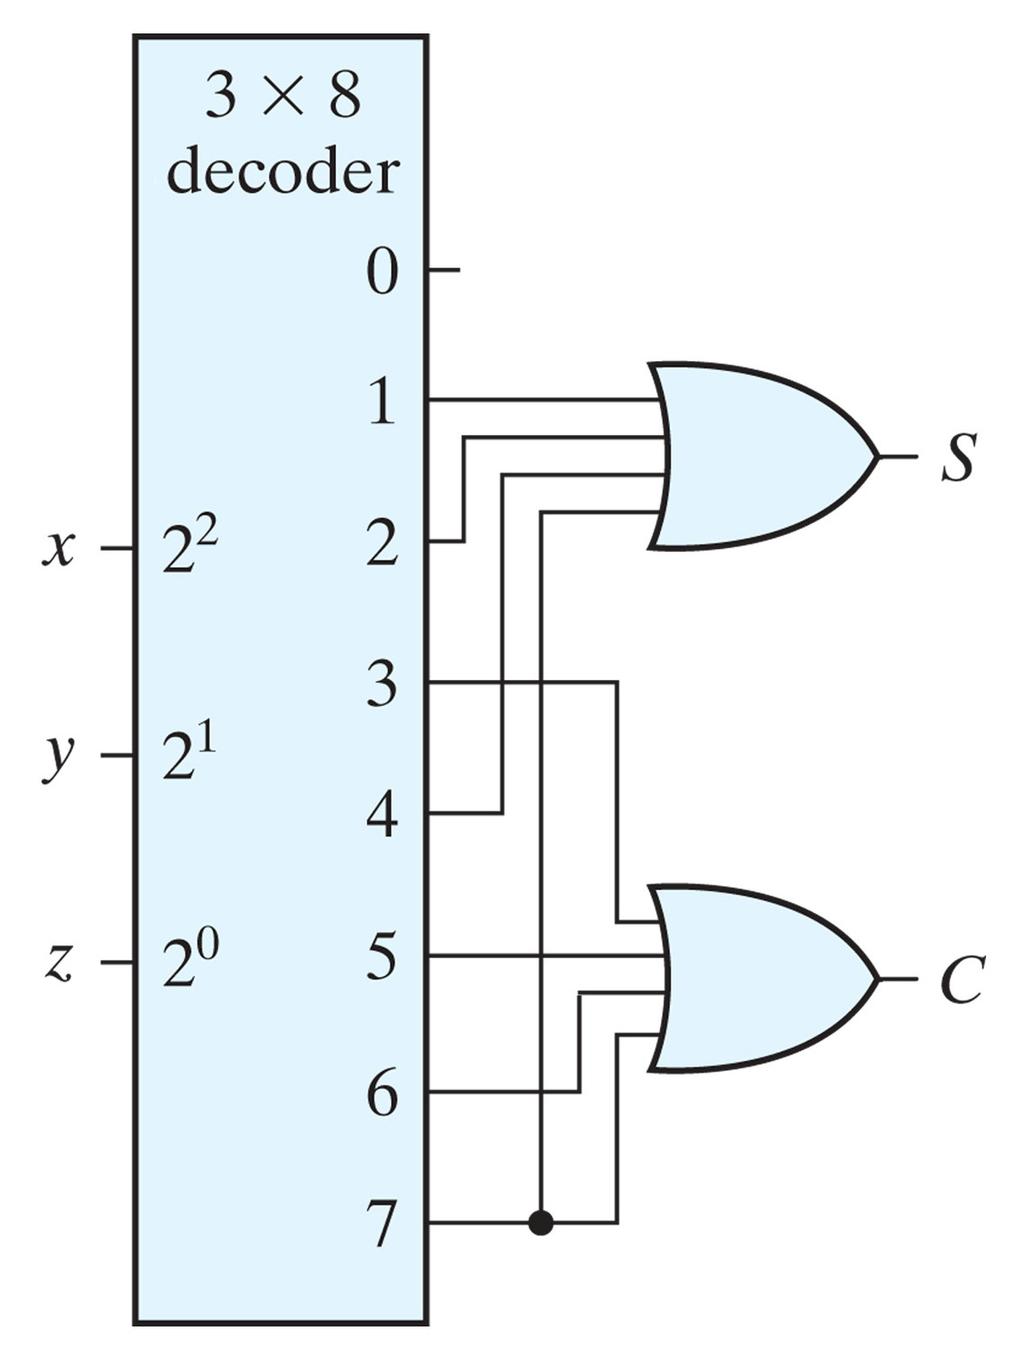 Decoders: Function Implementation Decoder provides the 2 n minterms of n input variables Each output is associated with a unique pattern of input bits Adding an OR gate to a decoder allows any